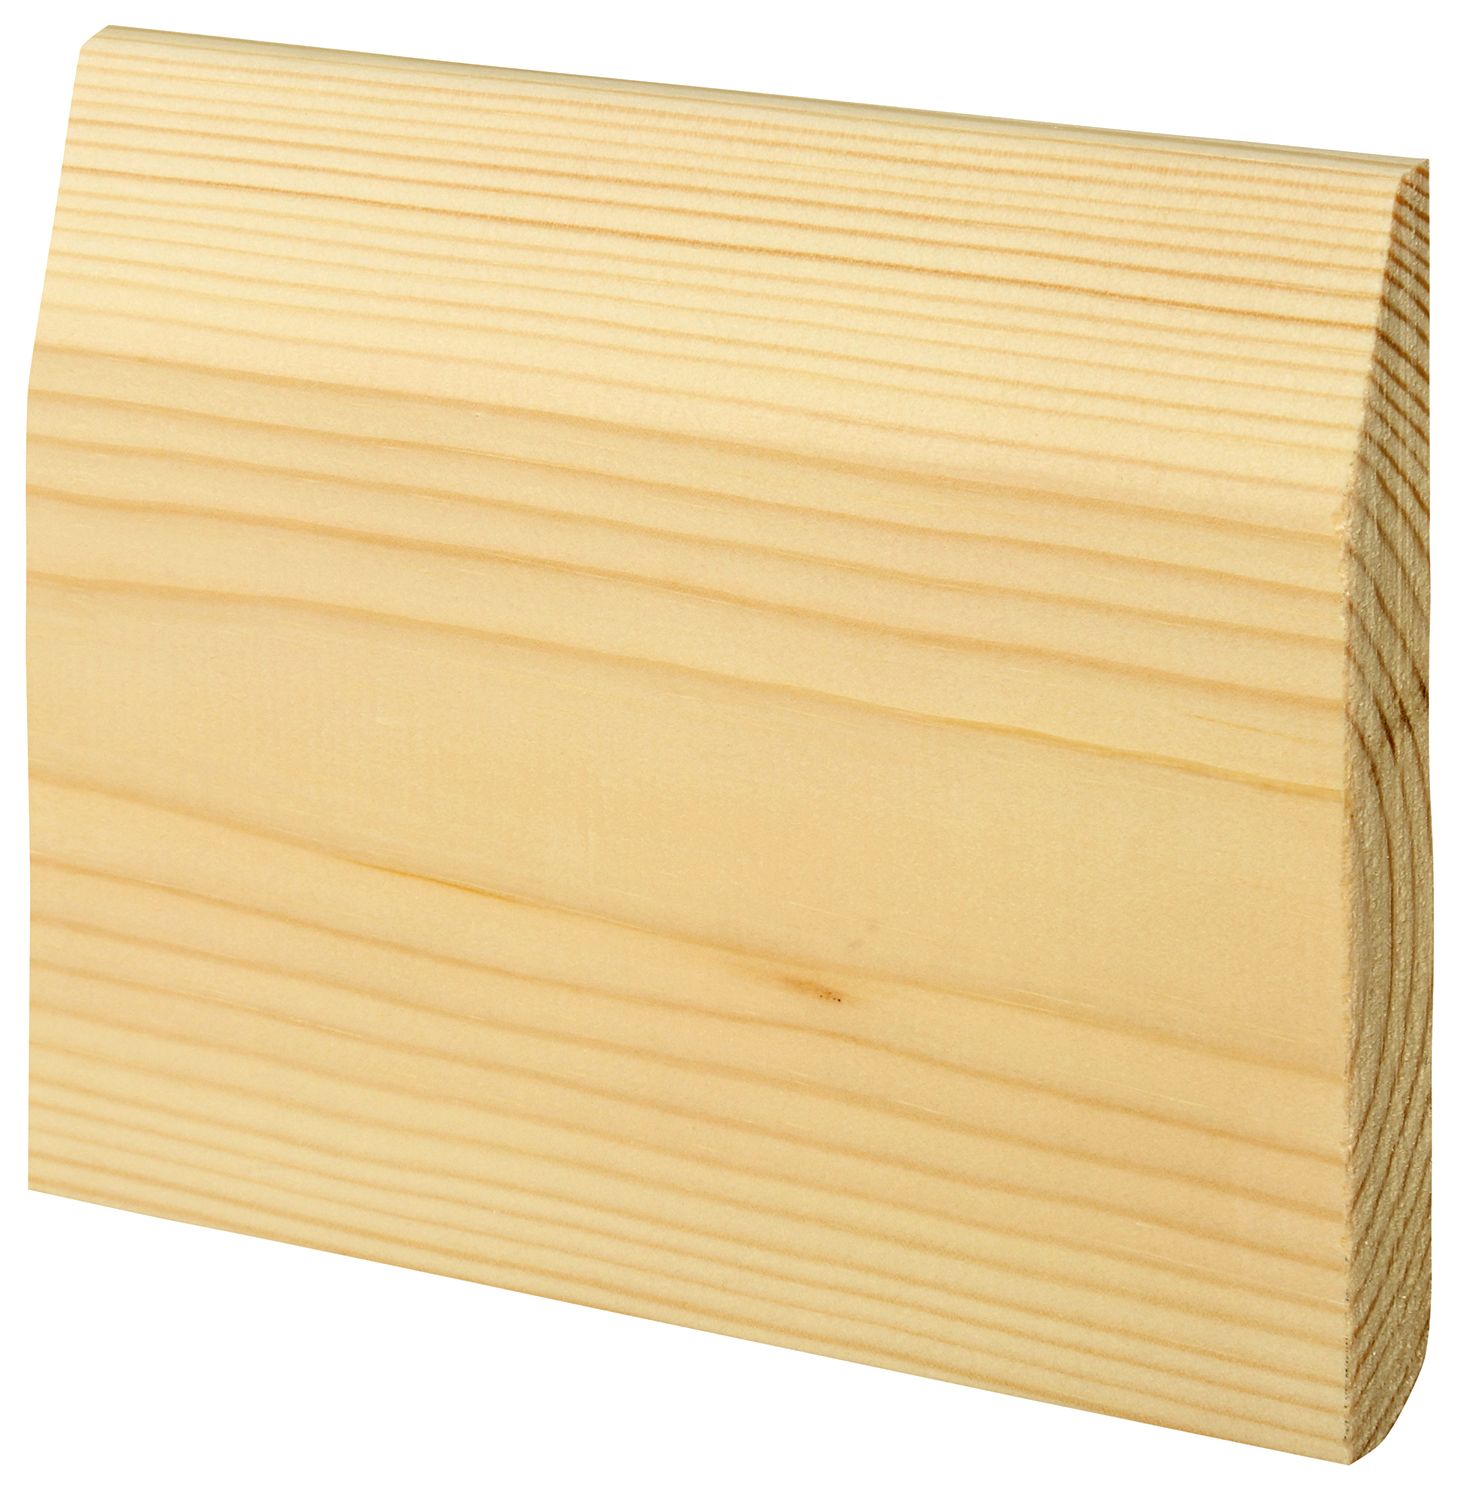 Image of Wickes Dual Purpose Chamfered/Bullnose Pine Skirting 19 x 119 x 2400mm - Pack of 4